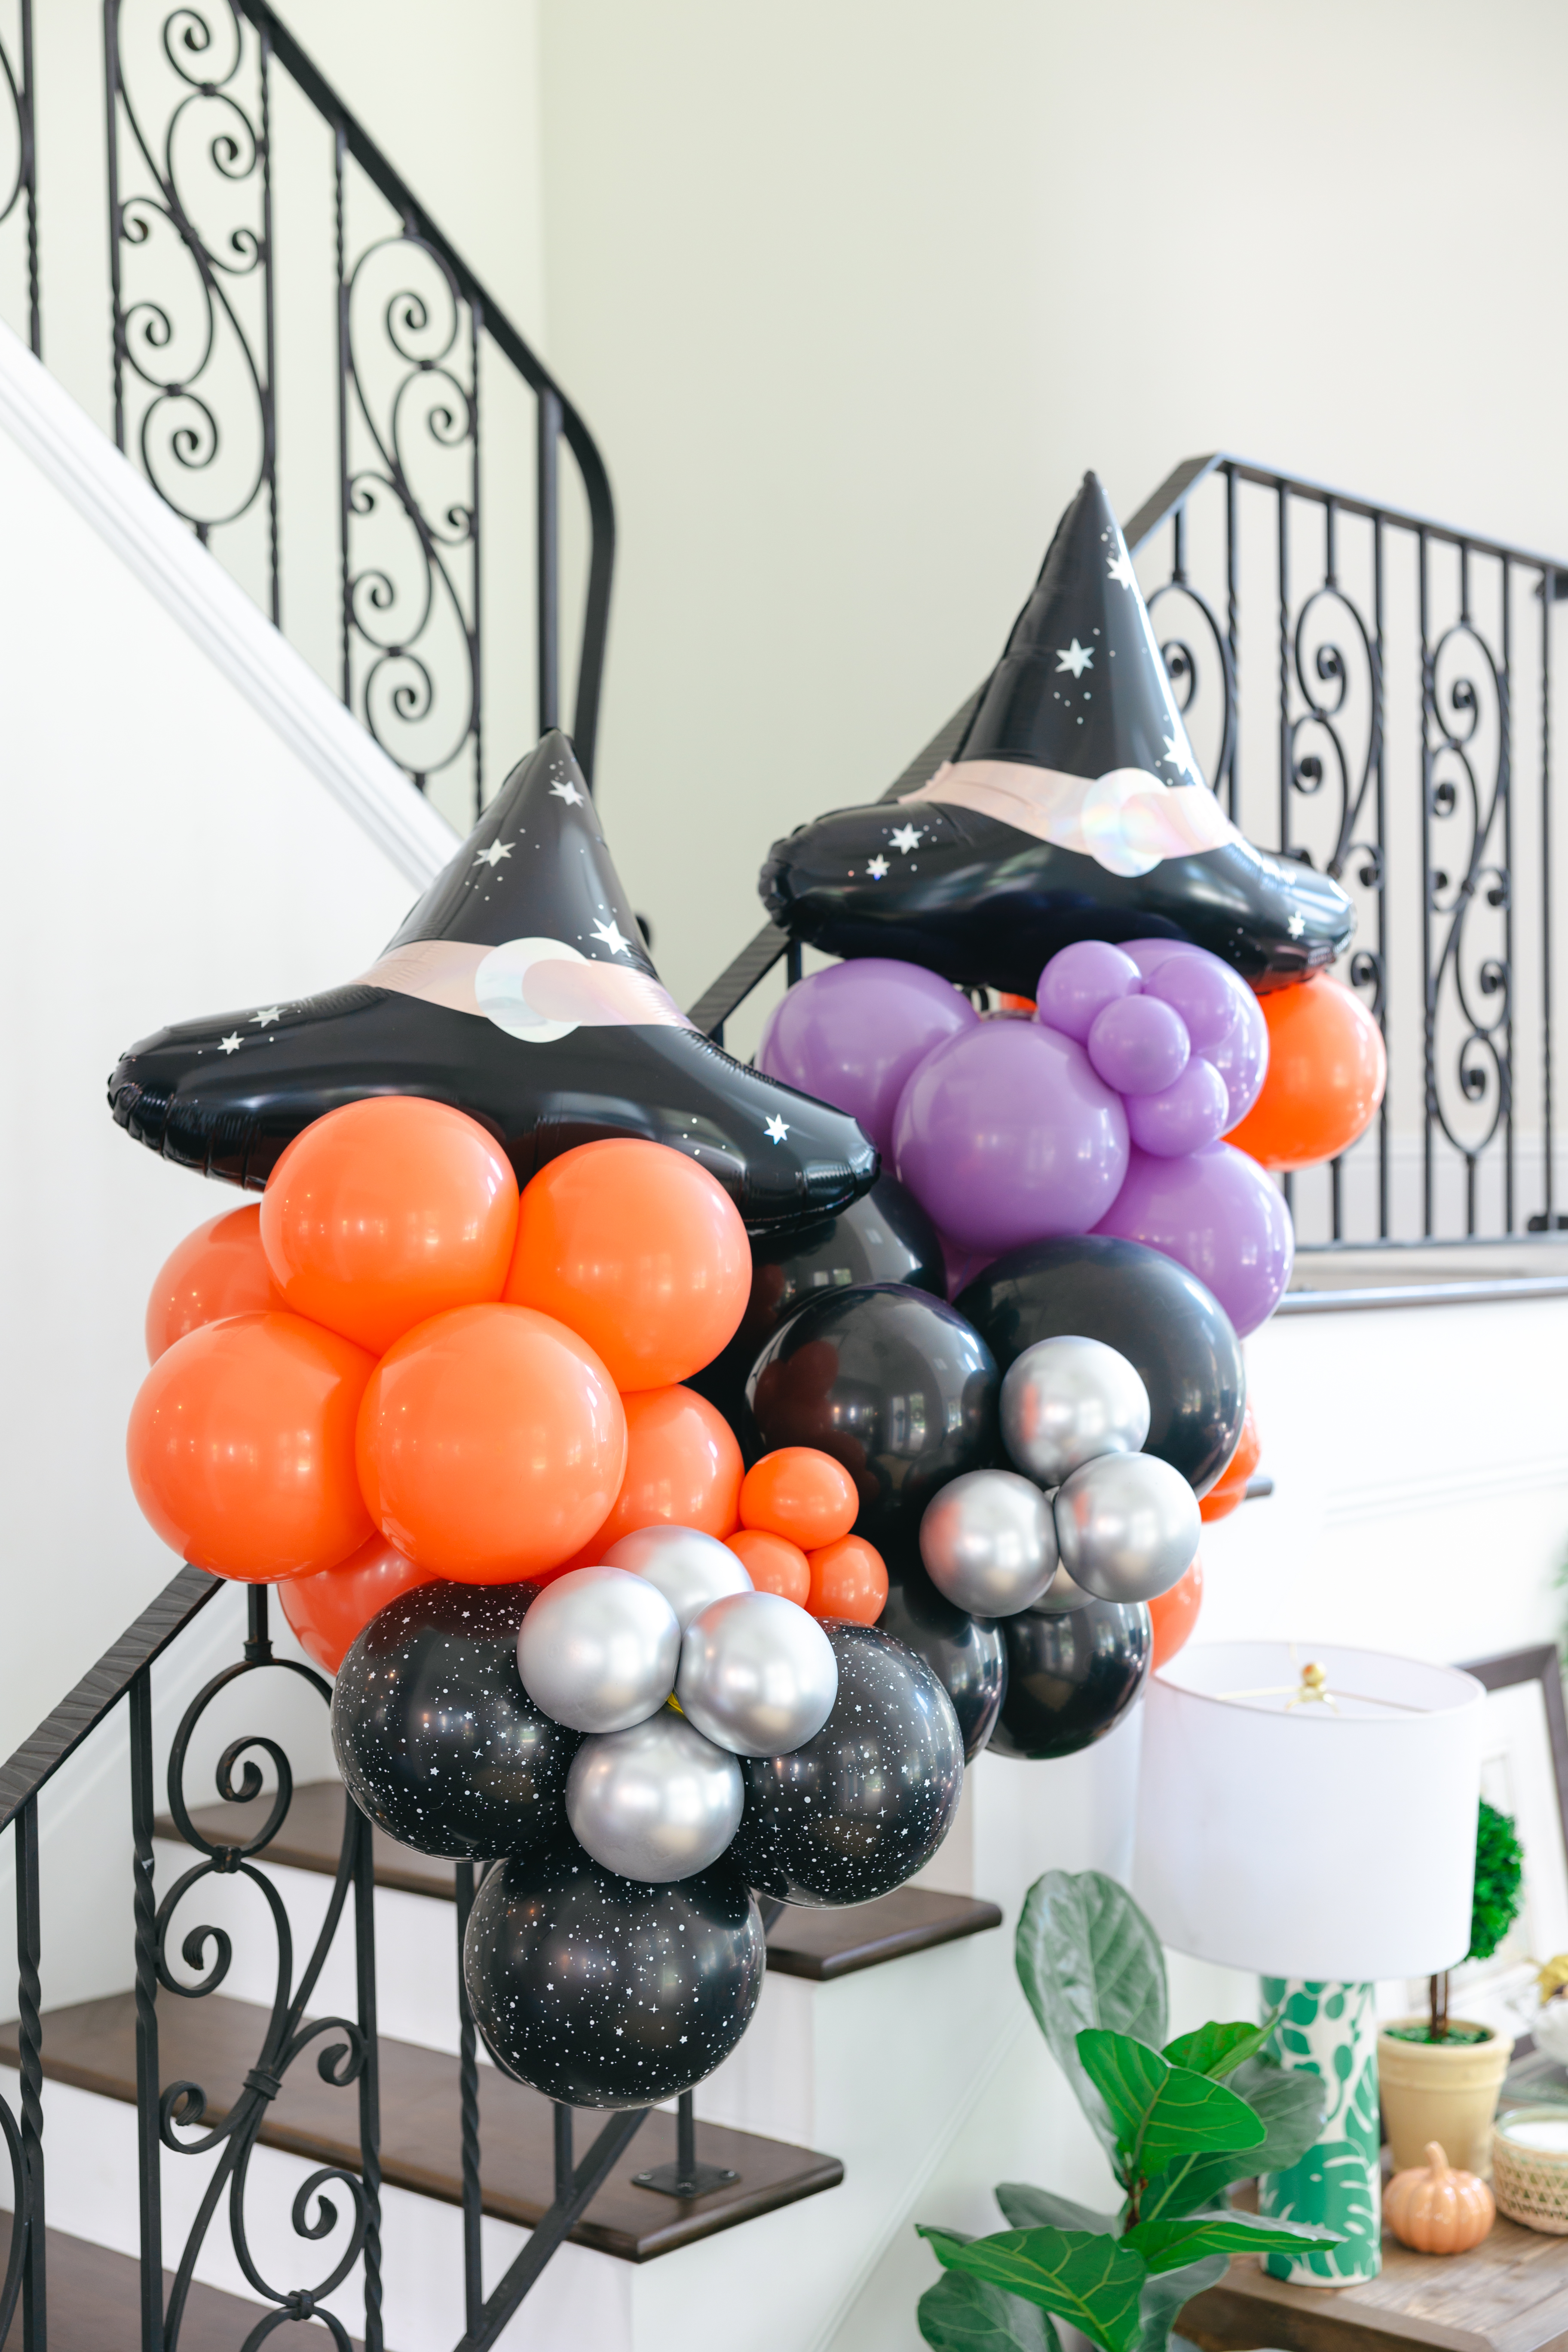 Small balloon arch on staircase with two witches hat foil balloons.